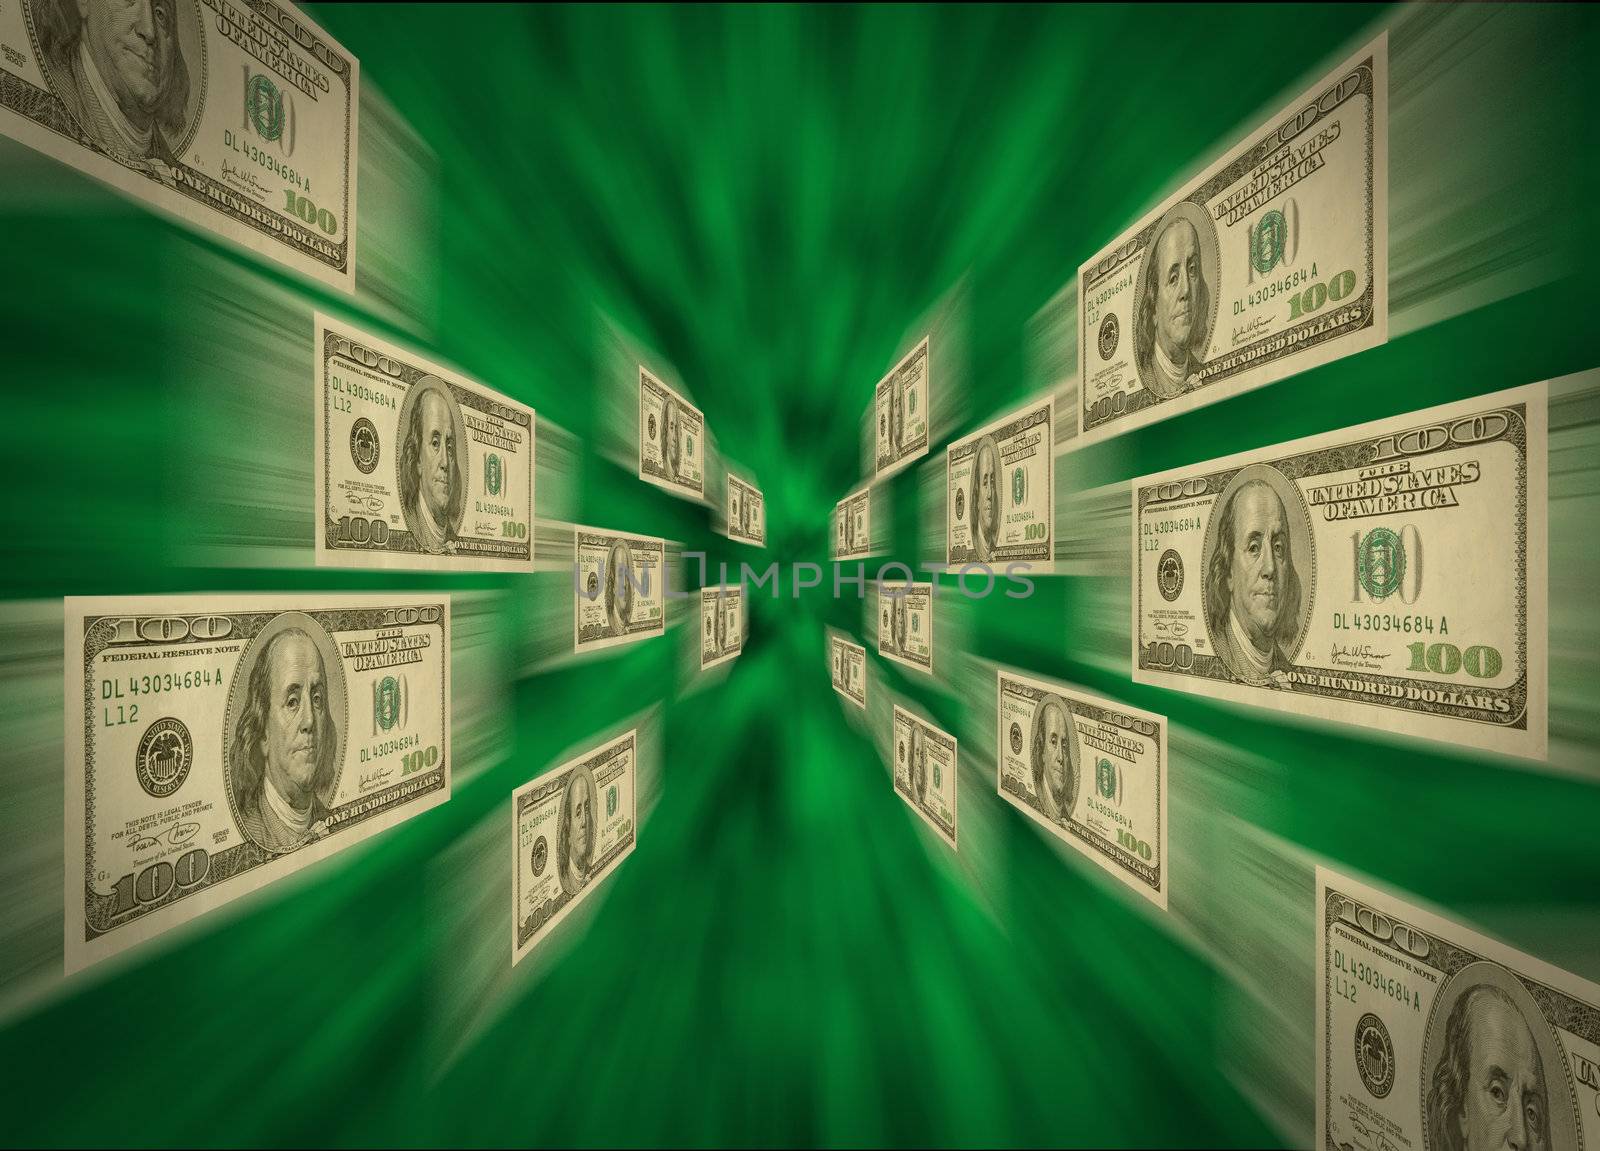 $100 bills flying through a green vortex, possibly representing high-speed cash flow, e-commerce, and transactions